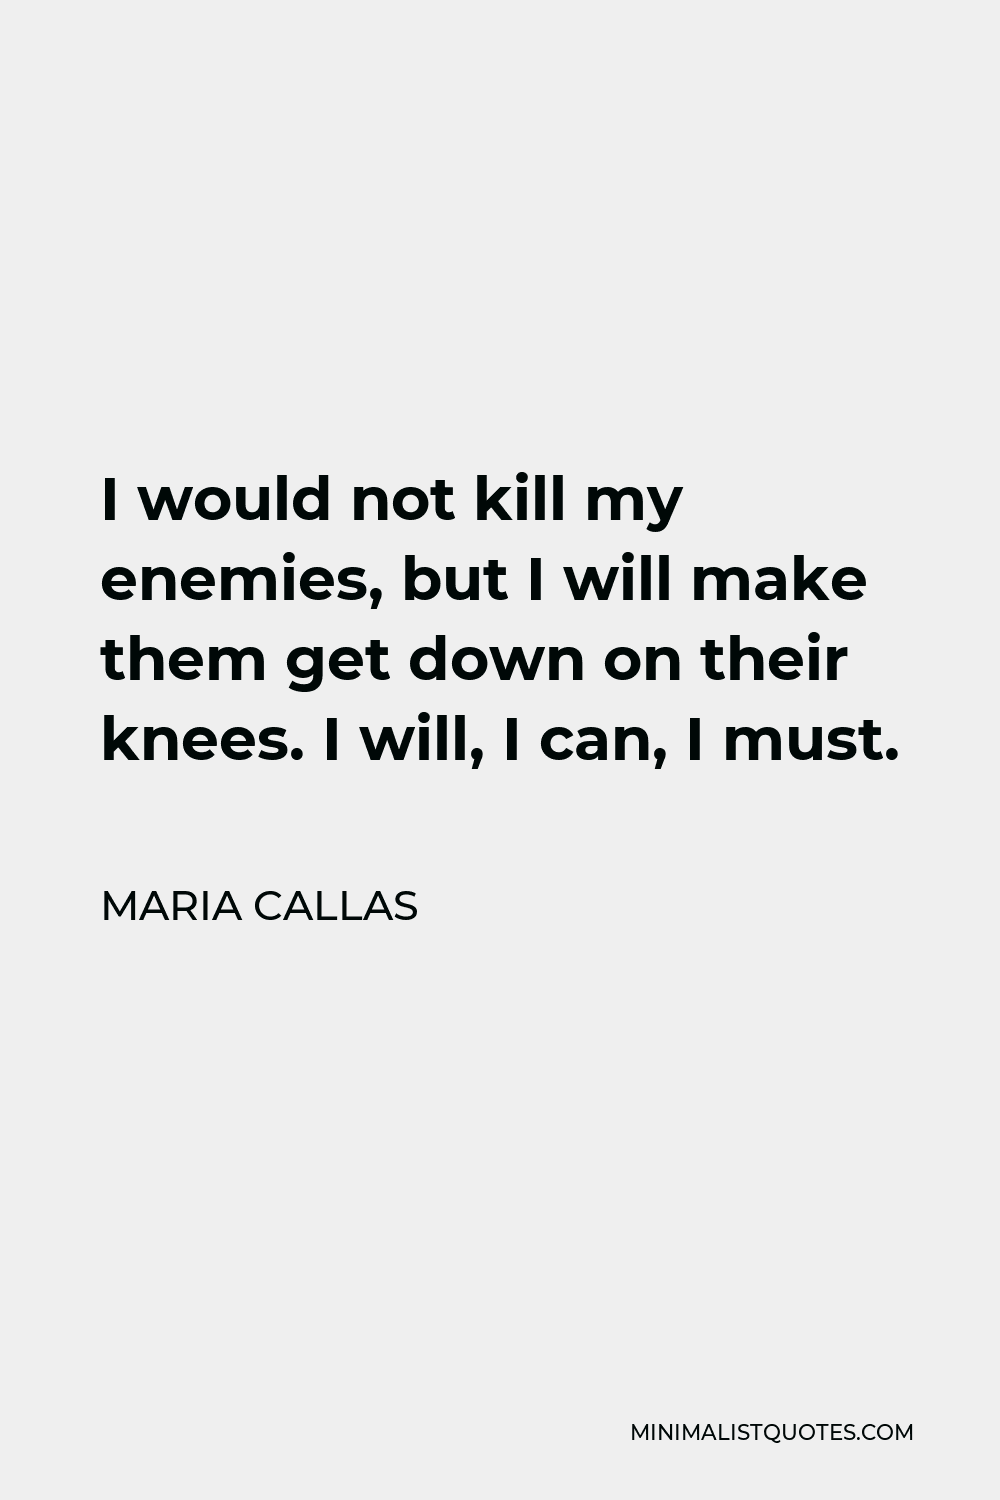 Maria Callas Quote - I would not kill my enemies, but I will make them get down on their knees. I will, I can, I must.